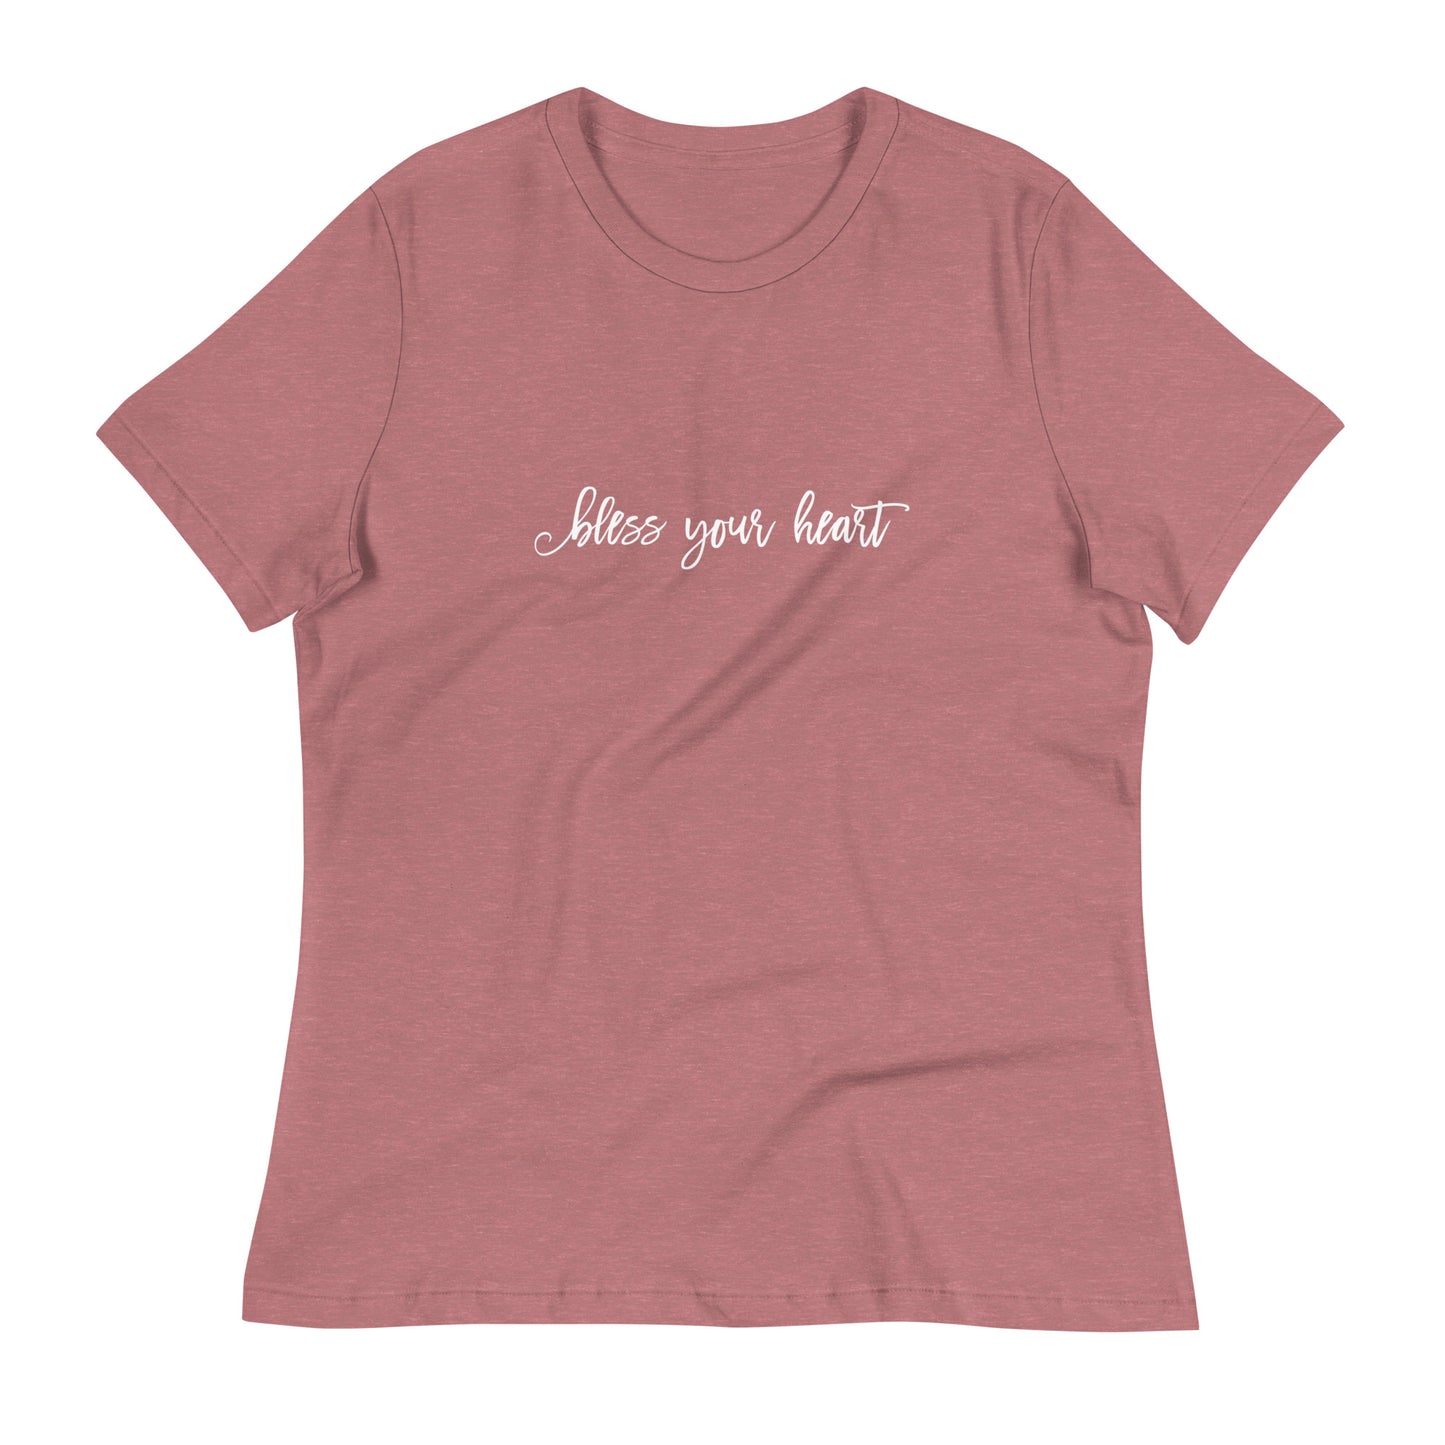 Heather Mauve women's relaxed fit t-shirt with white graphic in an excessively twee font: "bless your heart"